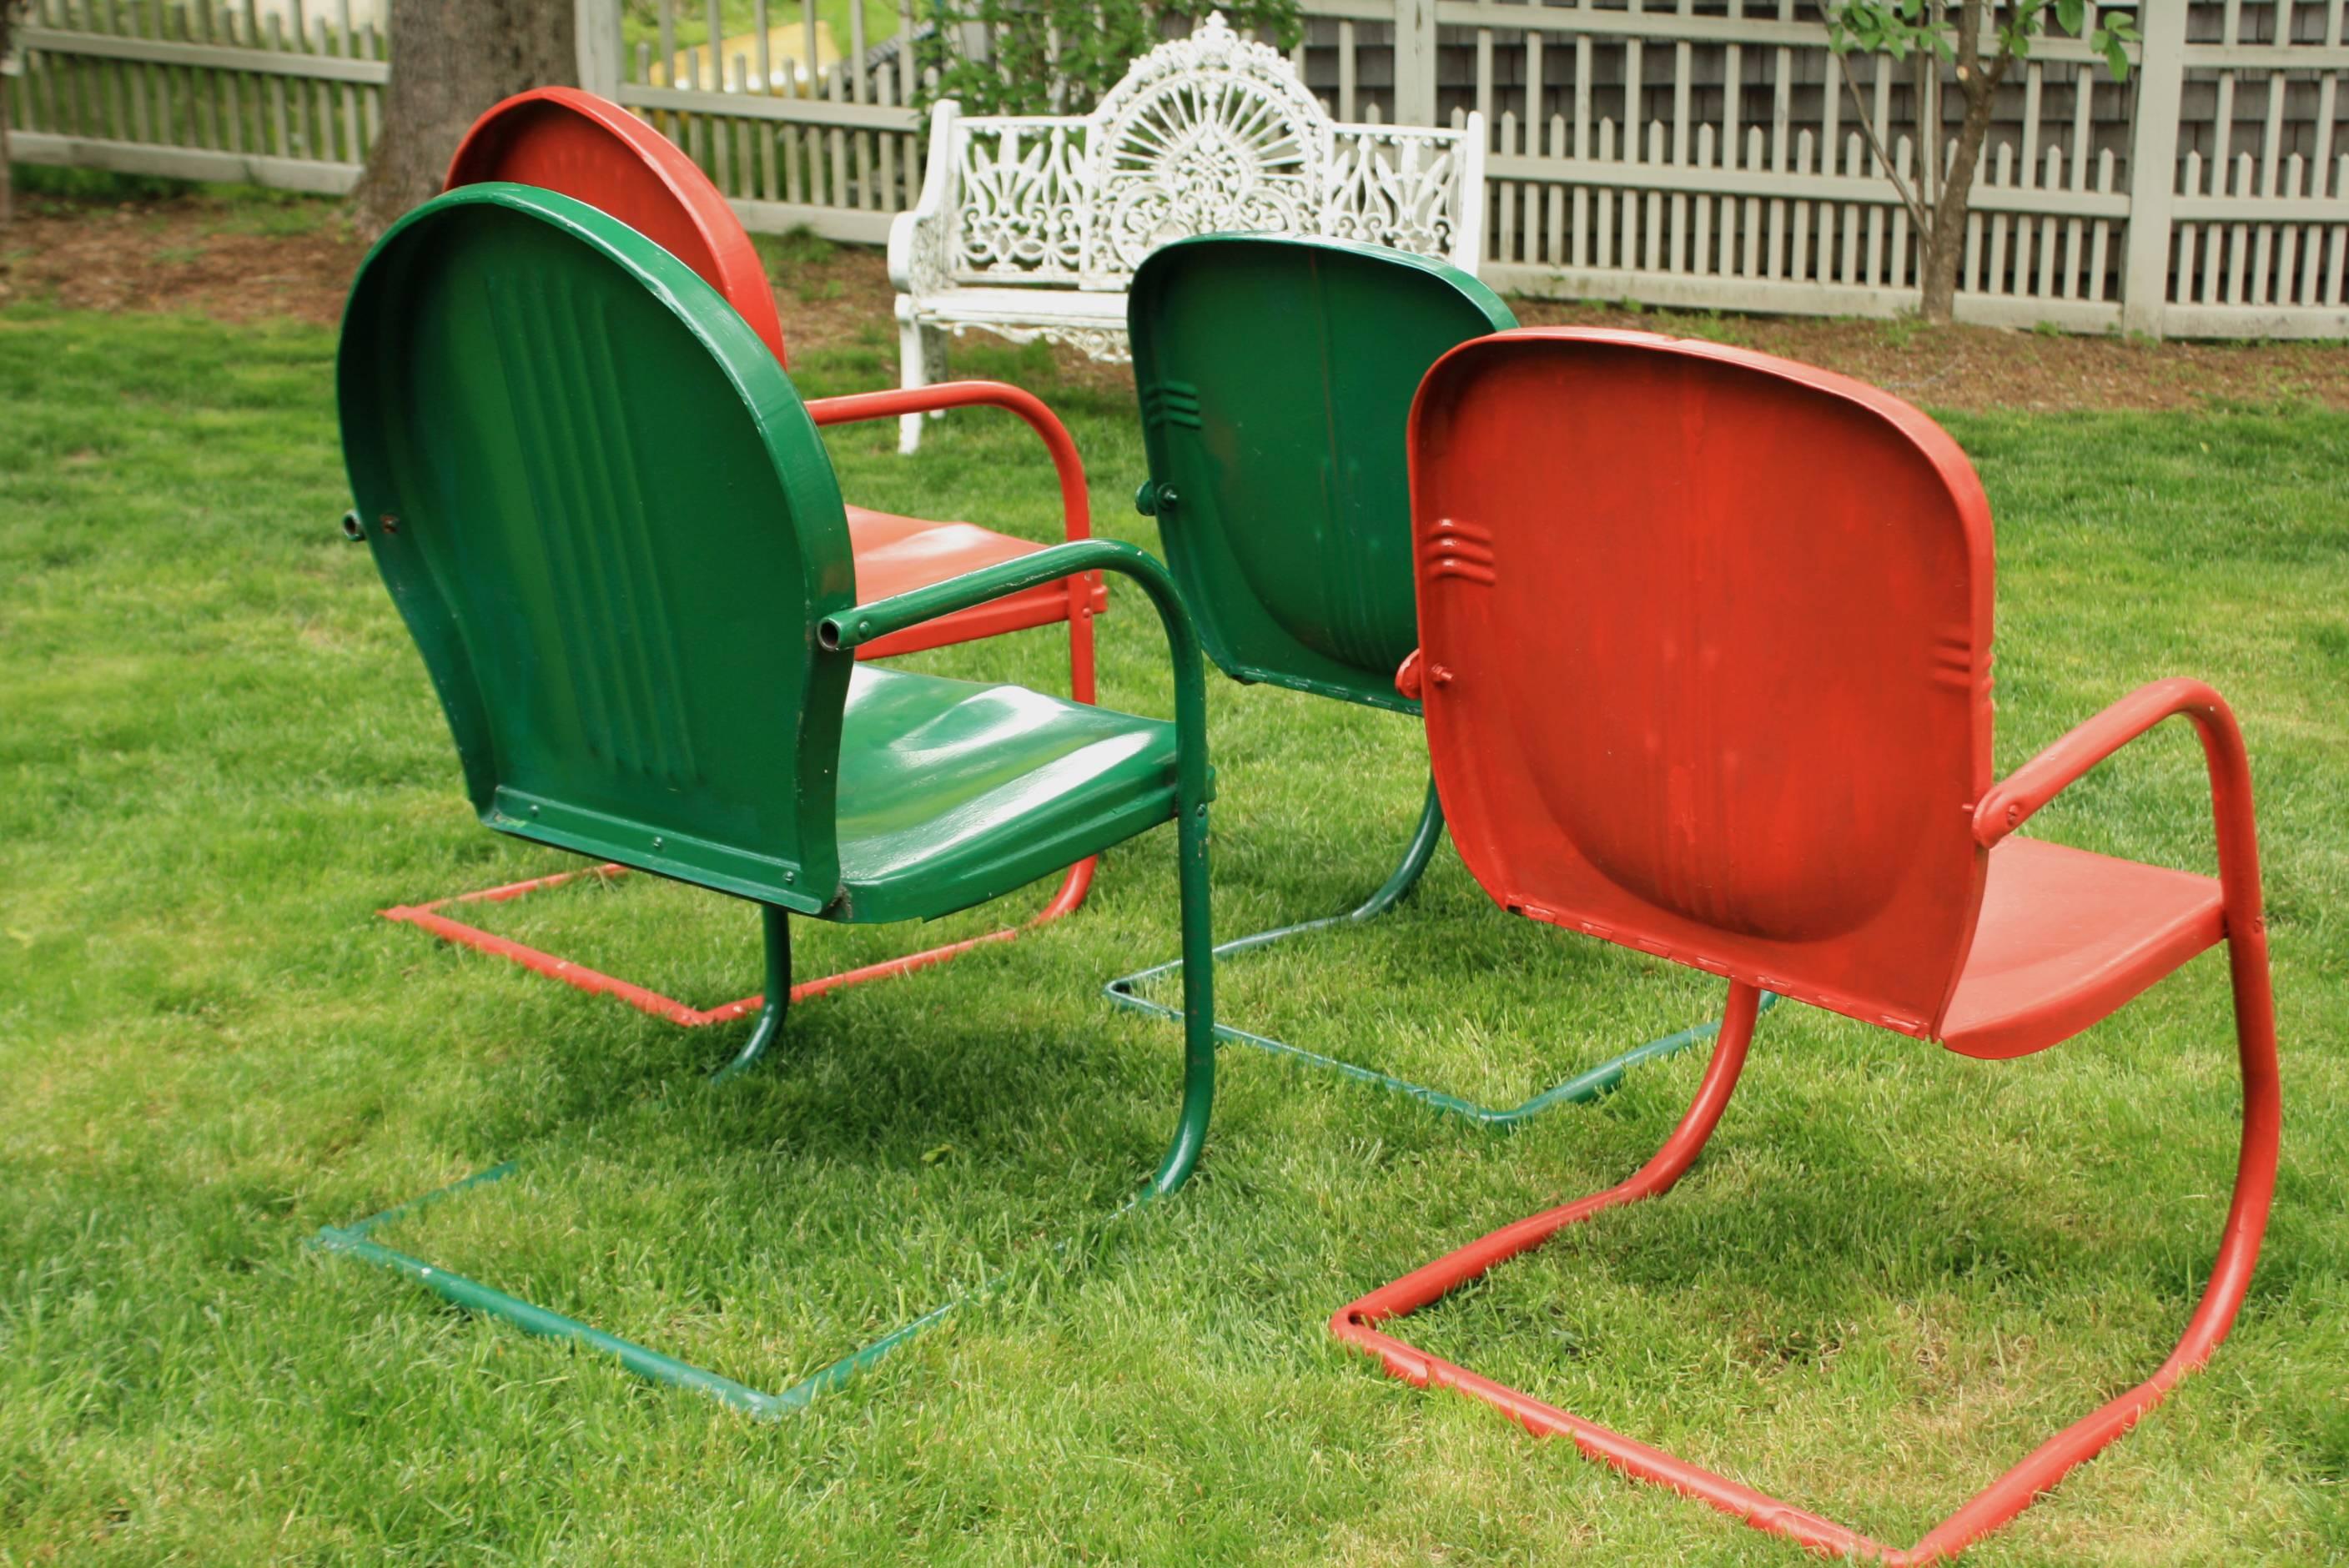 American Set of Four Painted Metal Vintage Patio or Garden Chairs